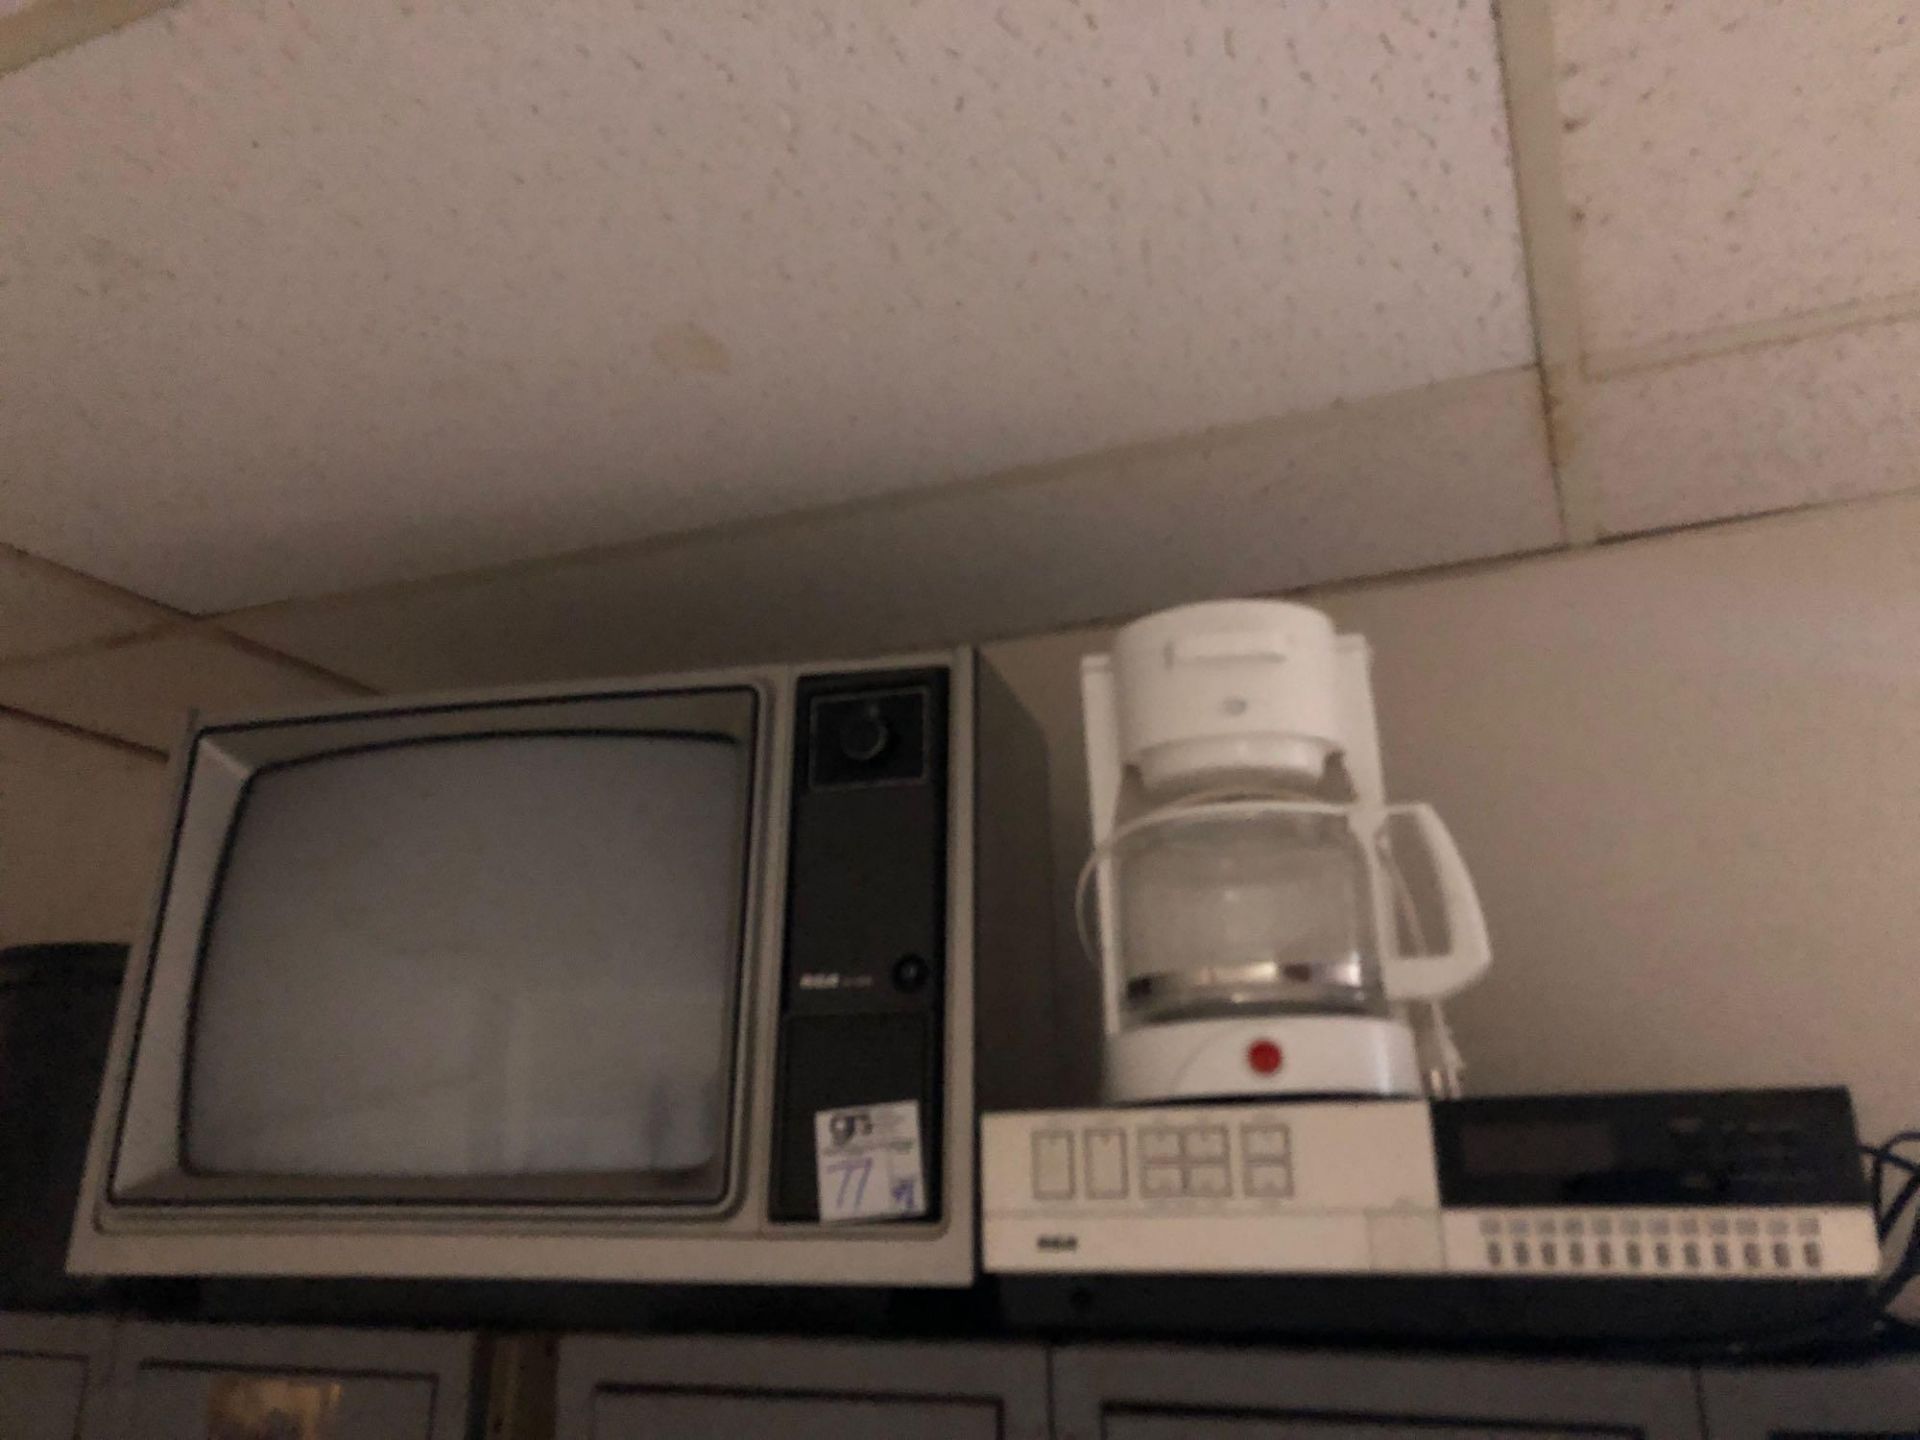 Vintage RCA Television, RCA VCR and Coffee Pot